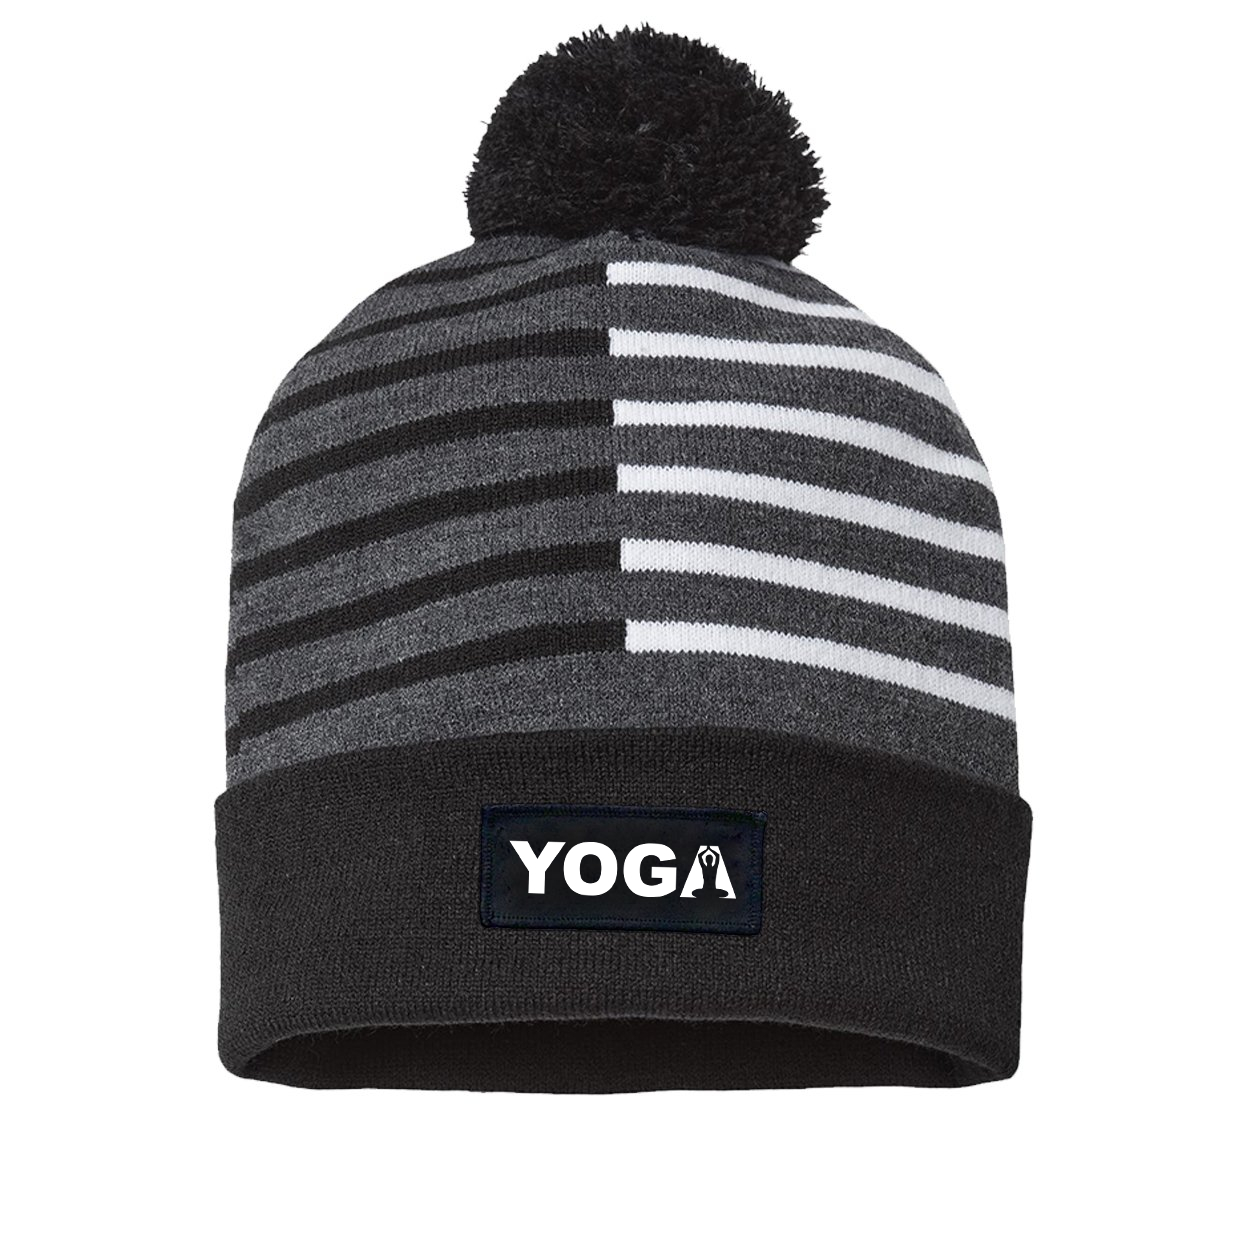 Yoga Meditation Logo Night Out Woven Patch Roll Up Pom Knit Beanie Half Color Black/White (White Logo)